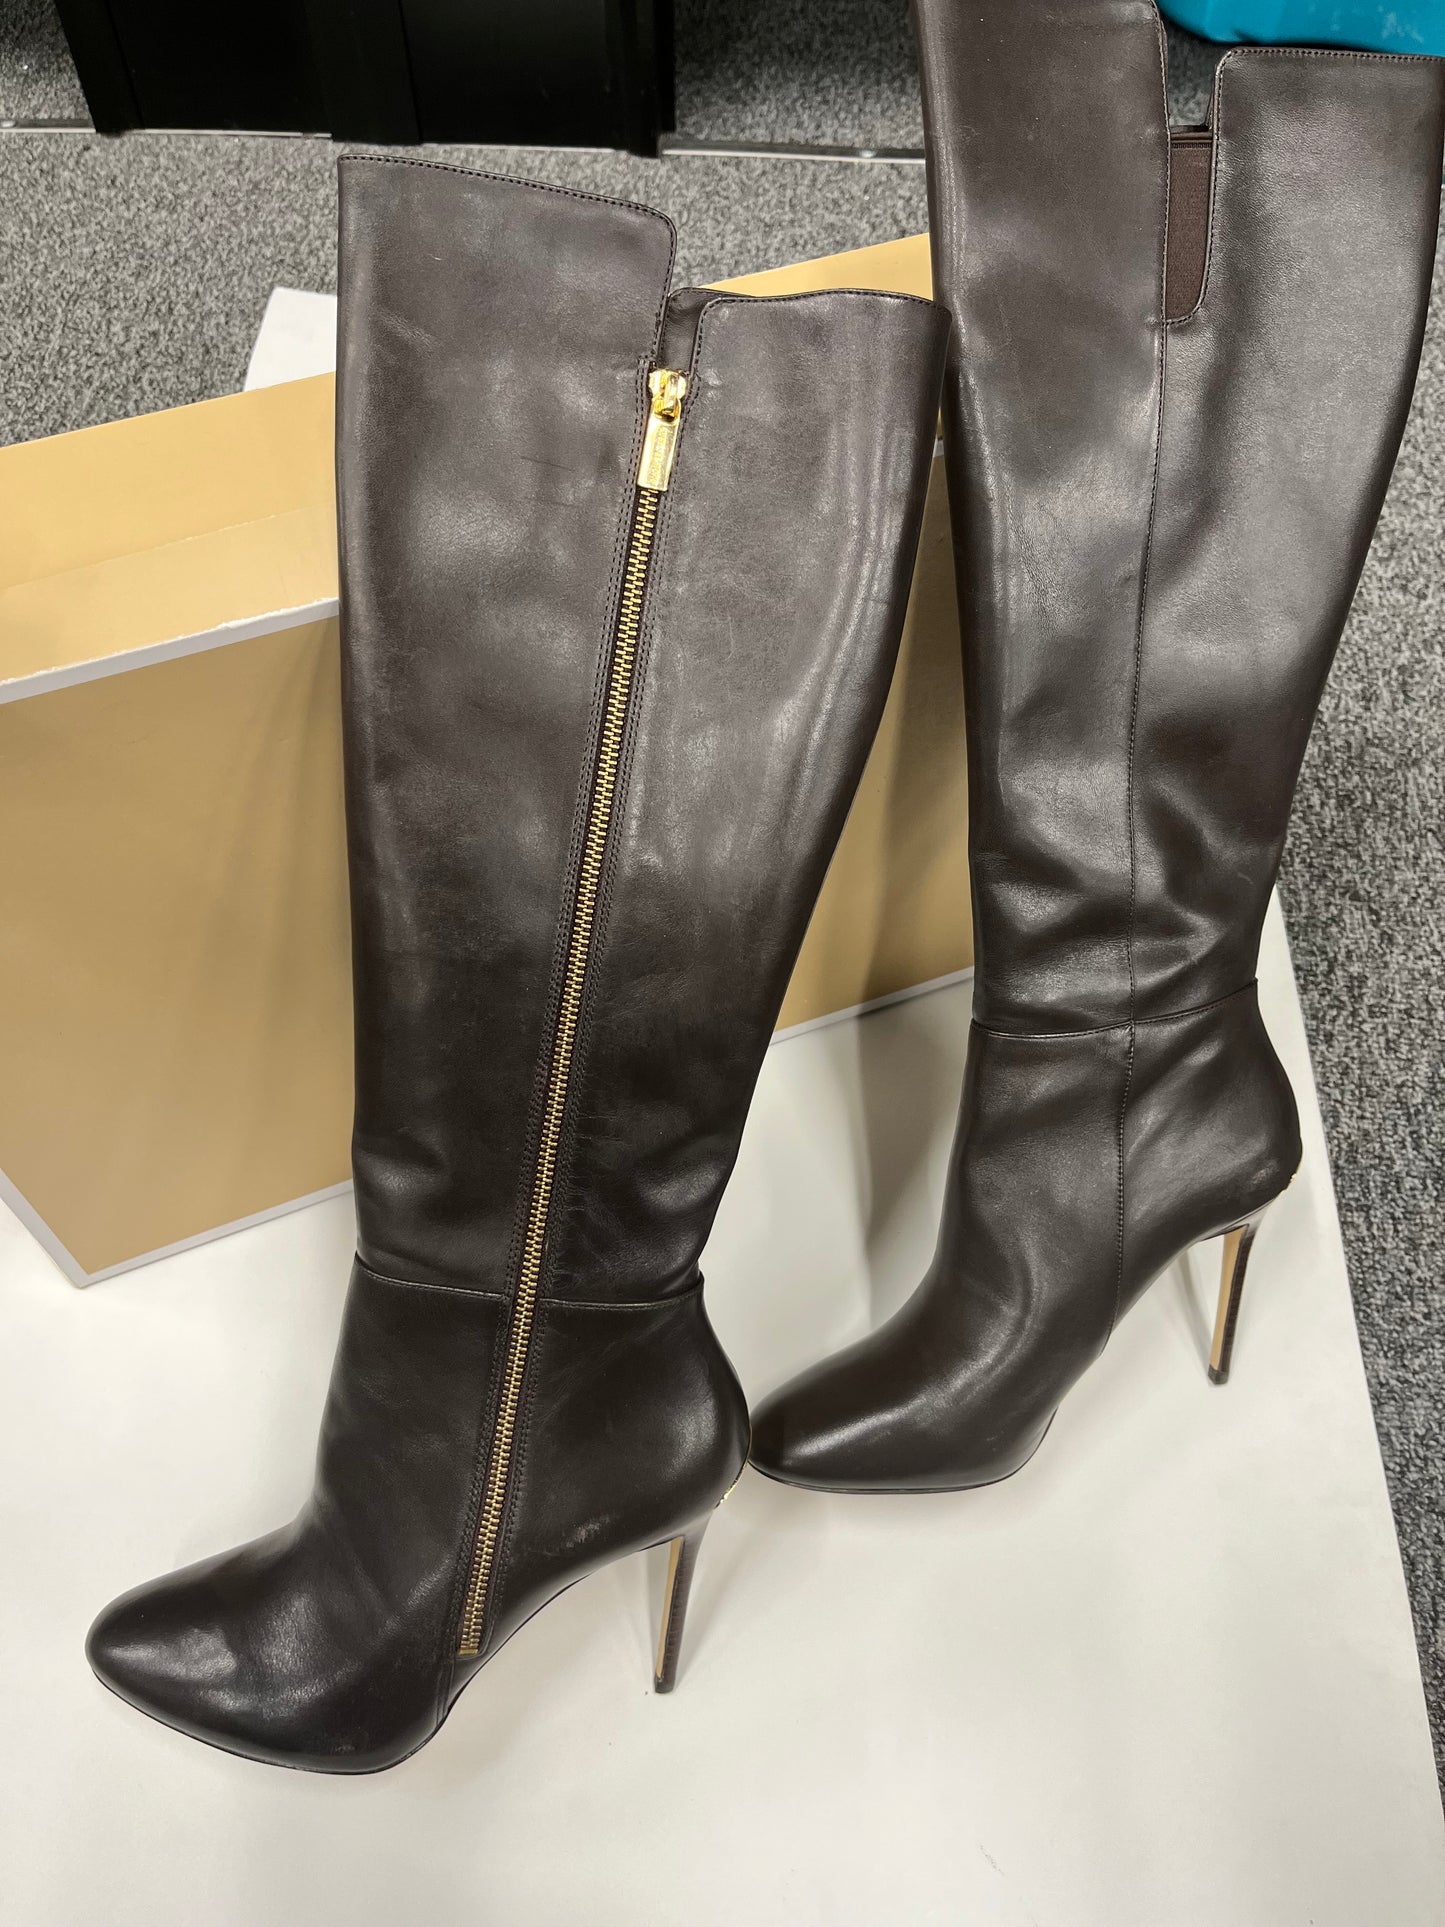 Boots Knee Heels By Michael Kors  Size: 8